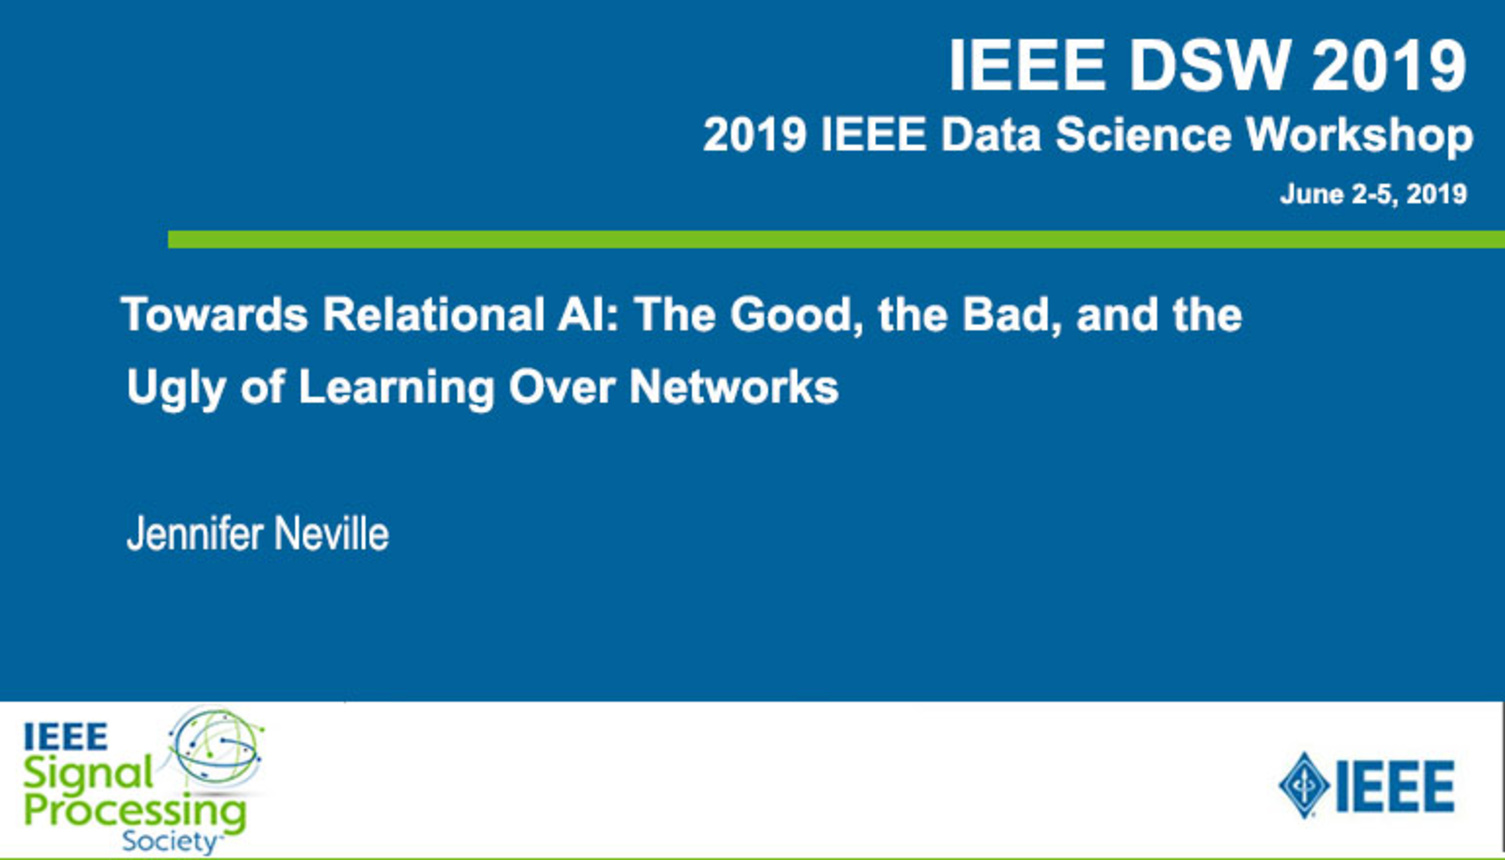 Towards Relational AI: The Good, the Bad, and the Ugly of Learning Over Networks